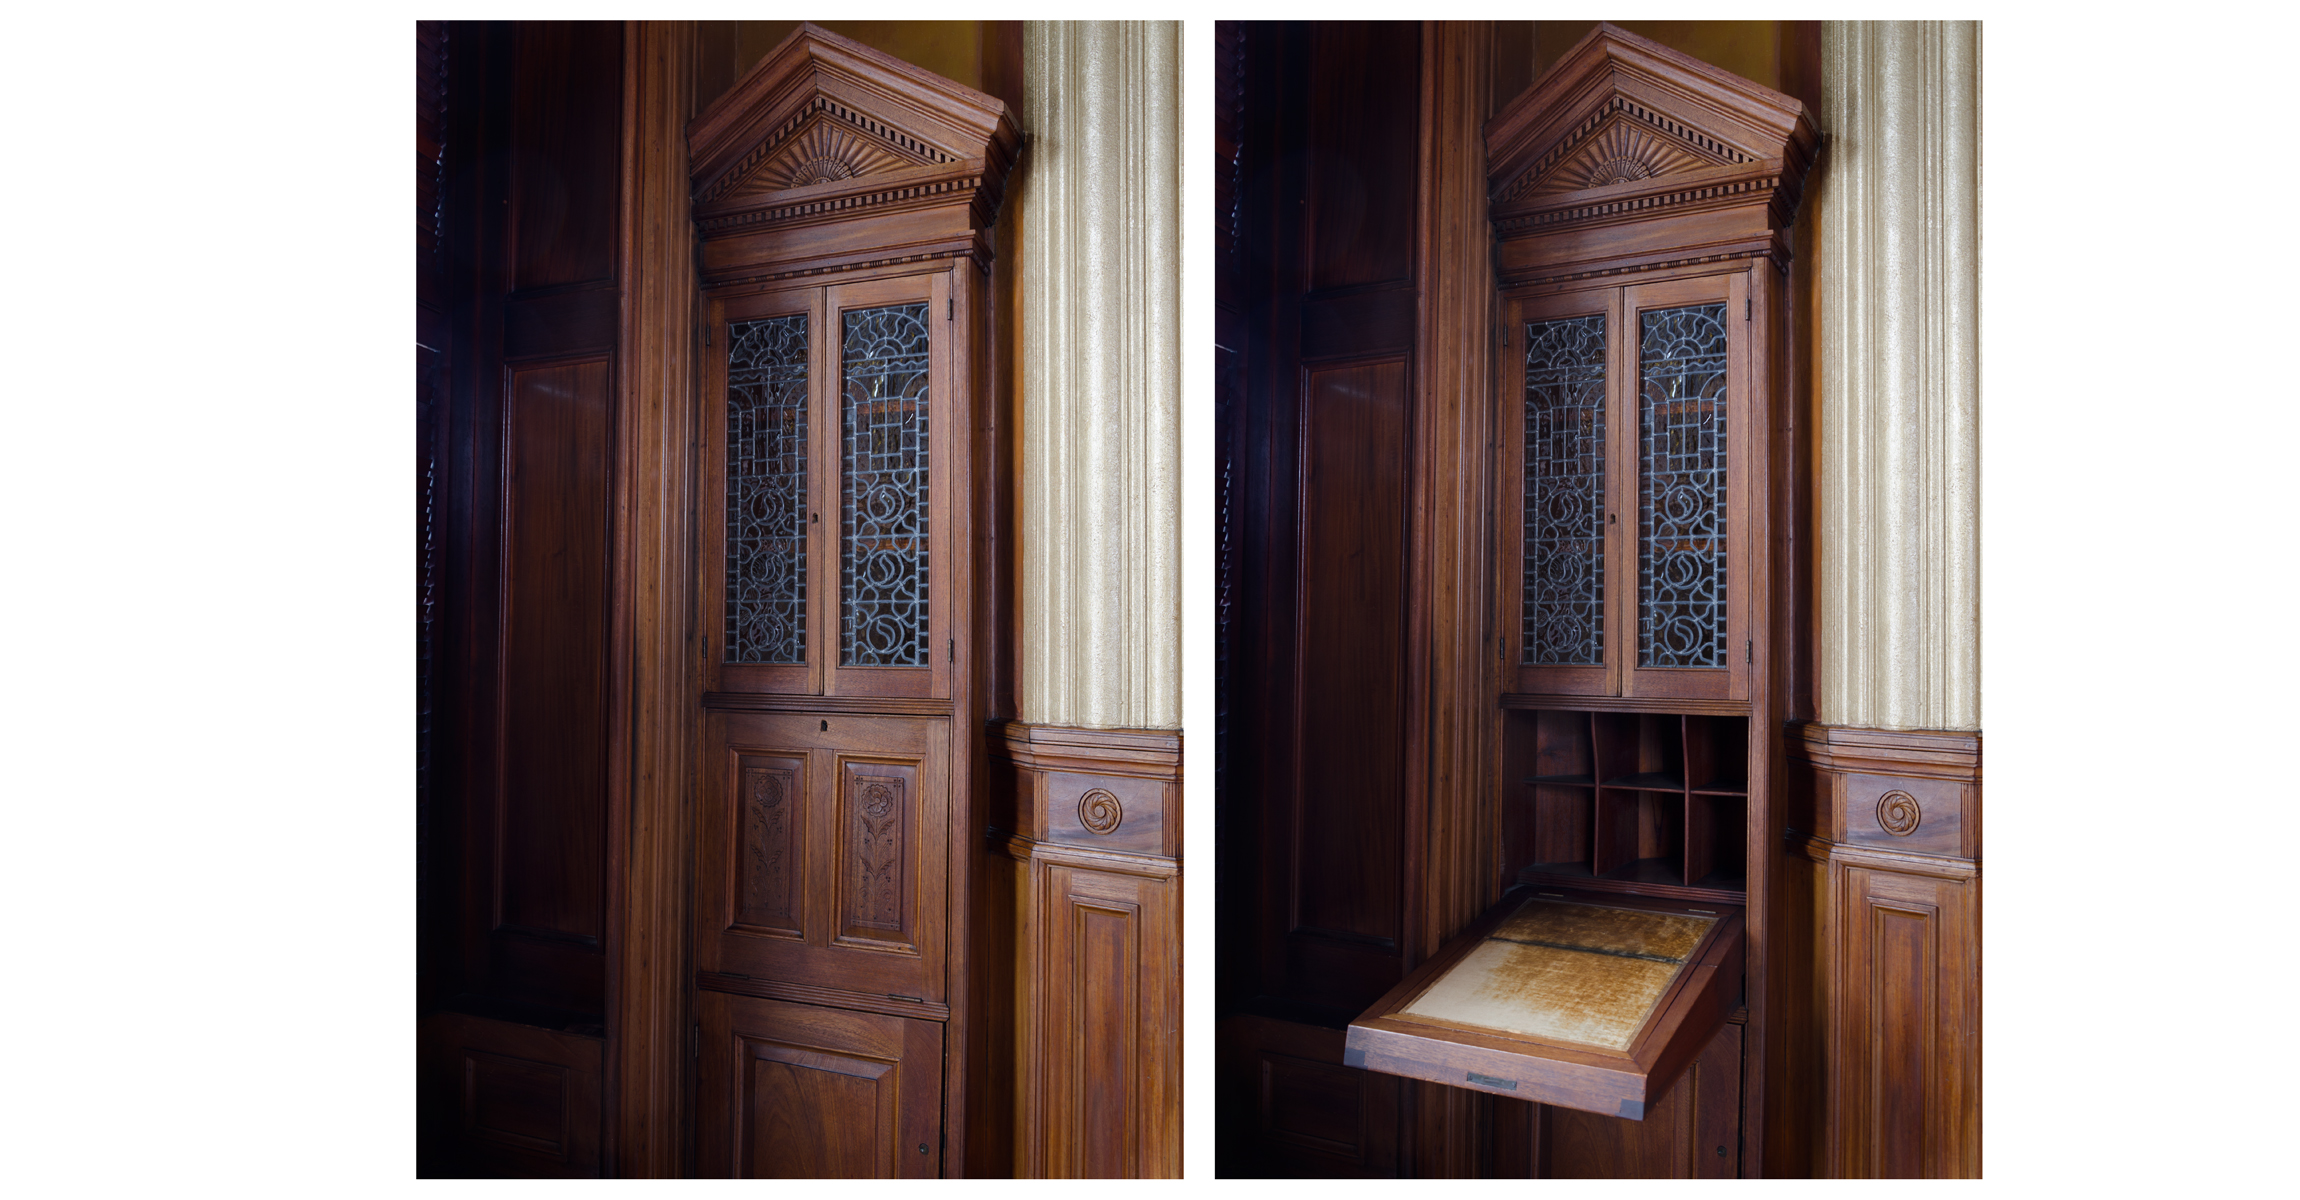 Decoratively carved wood cabinet with stained glass doors with second view showing the fold down desk open.